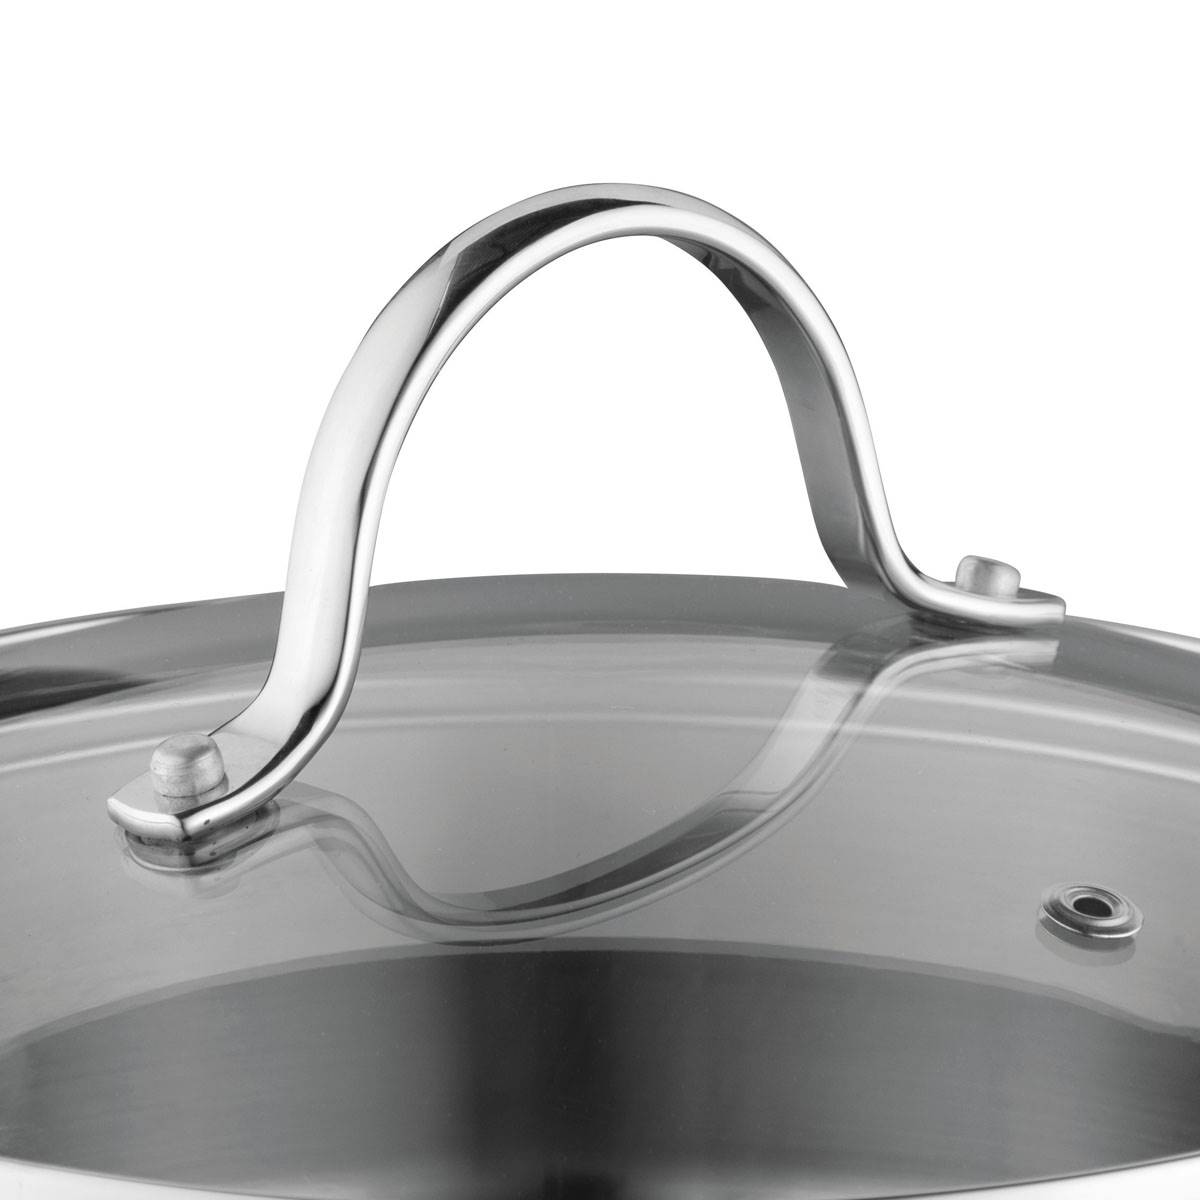 BergHOFF Essentials Comfort 10in. Covered Stockpot